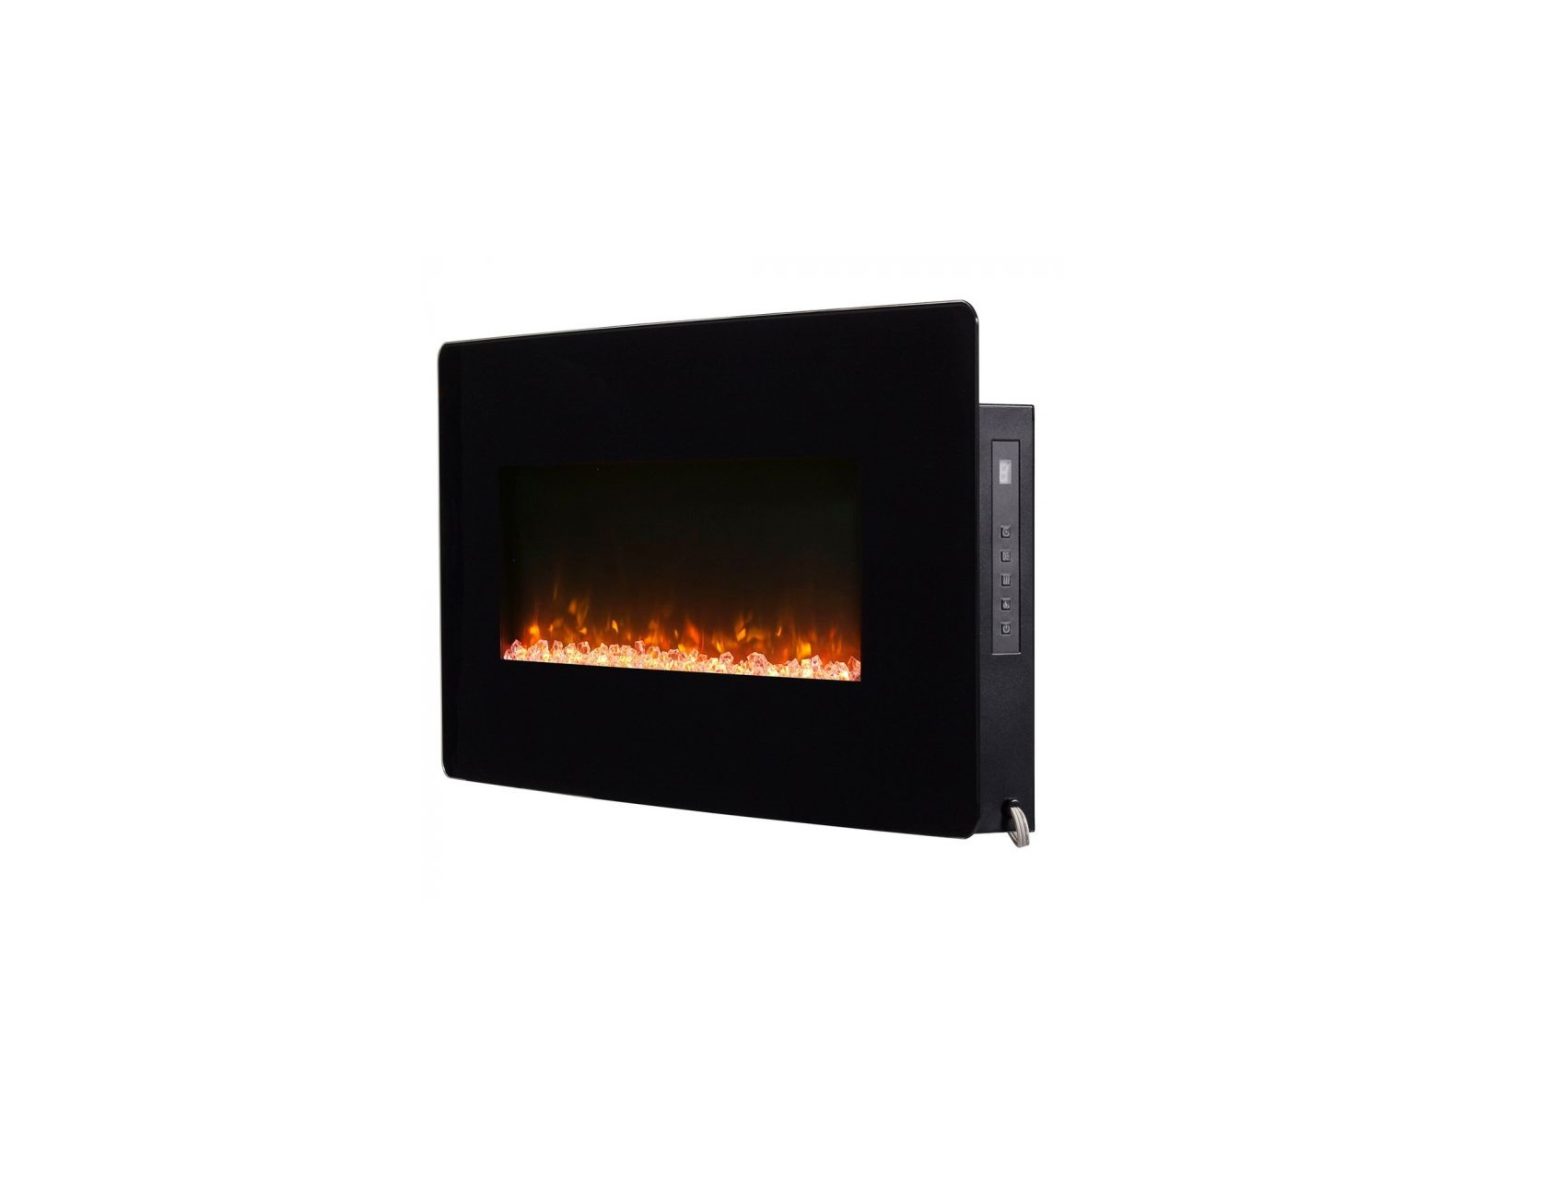 Dimplex SWM3520-EU Winslow 35 Inch Wall Mounted Electric Fireplace Owner’s Manual